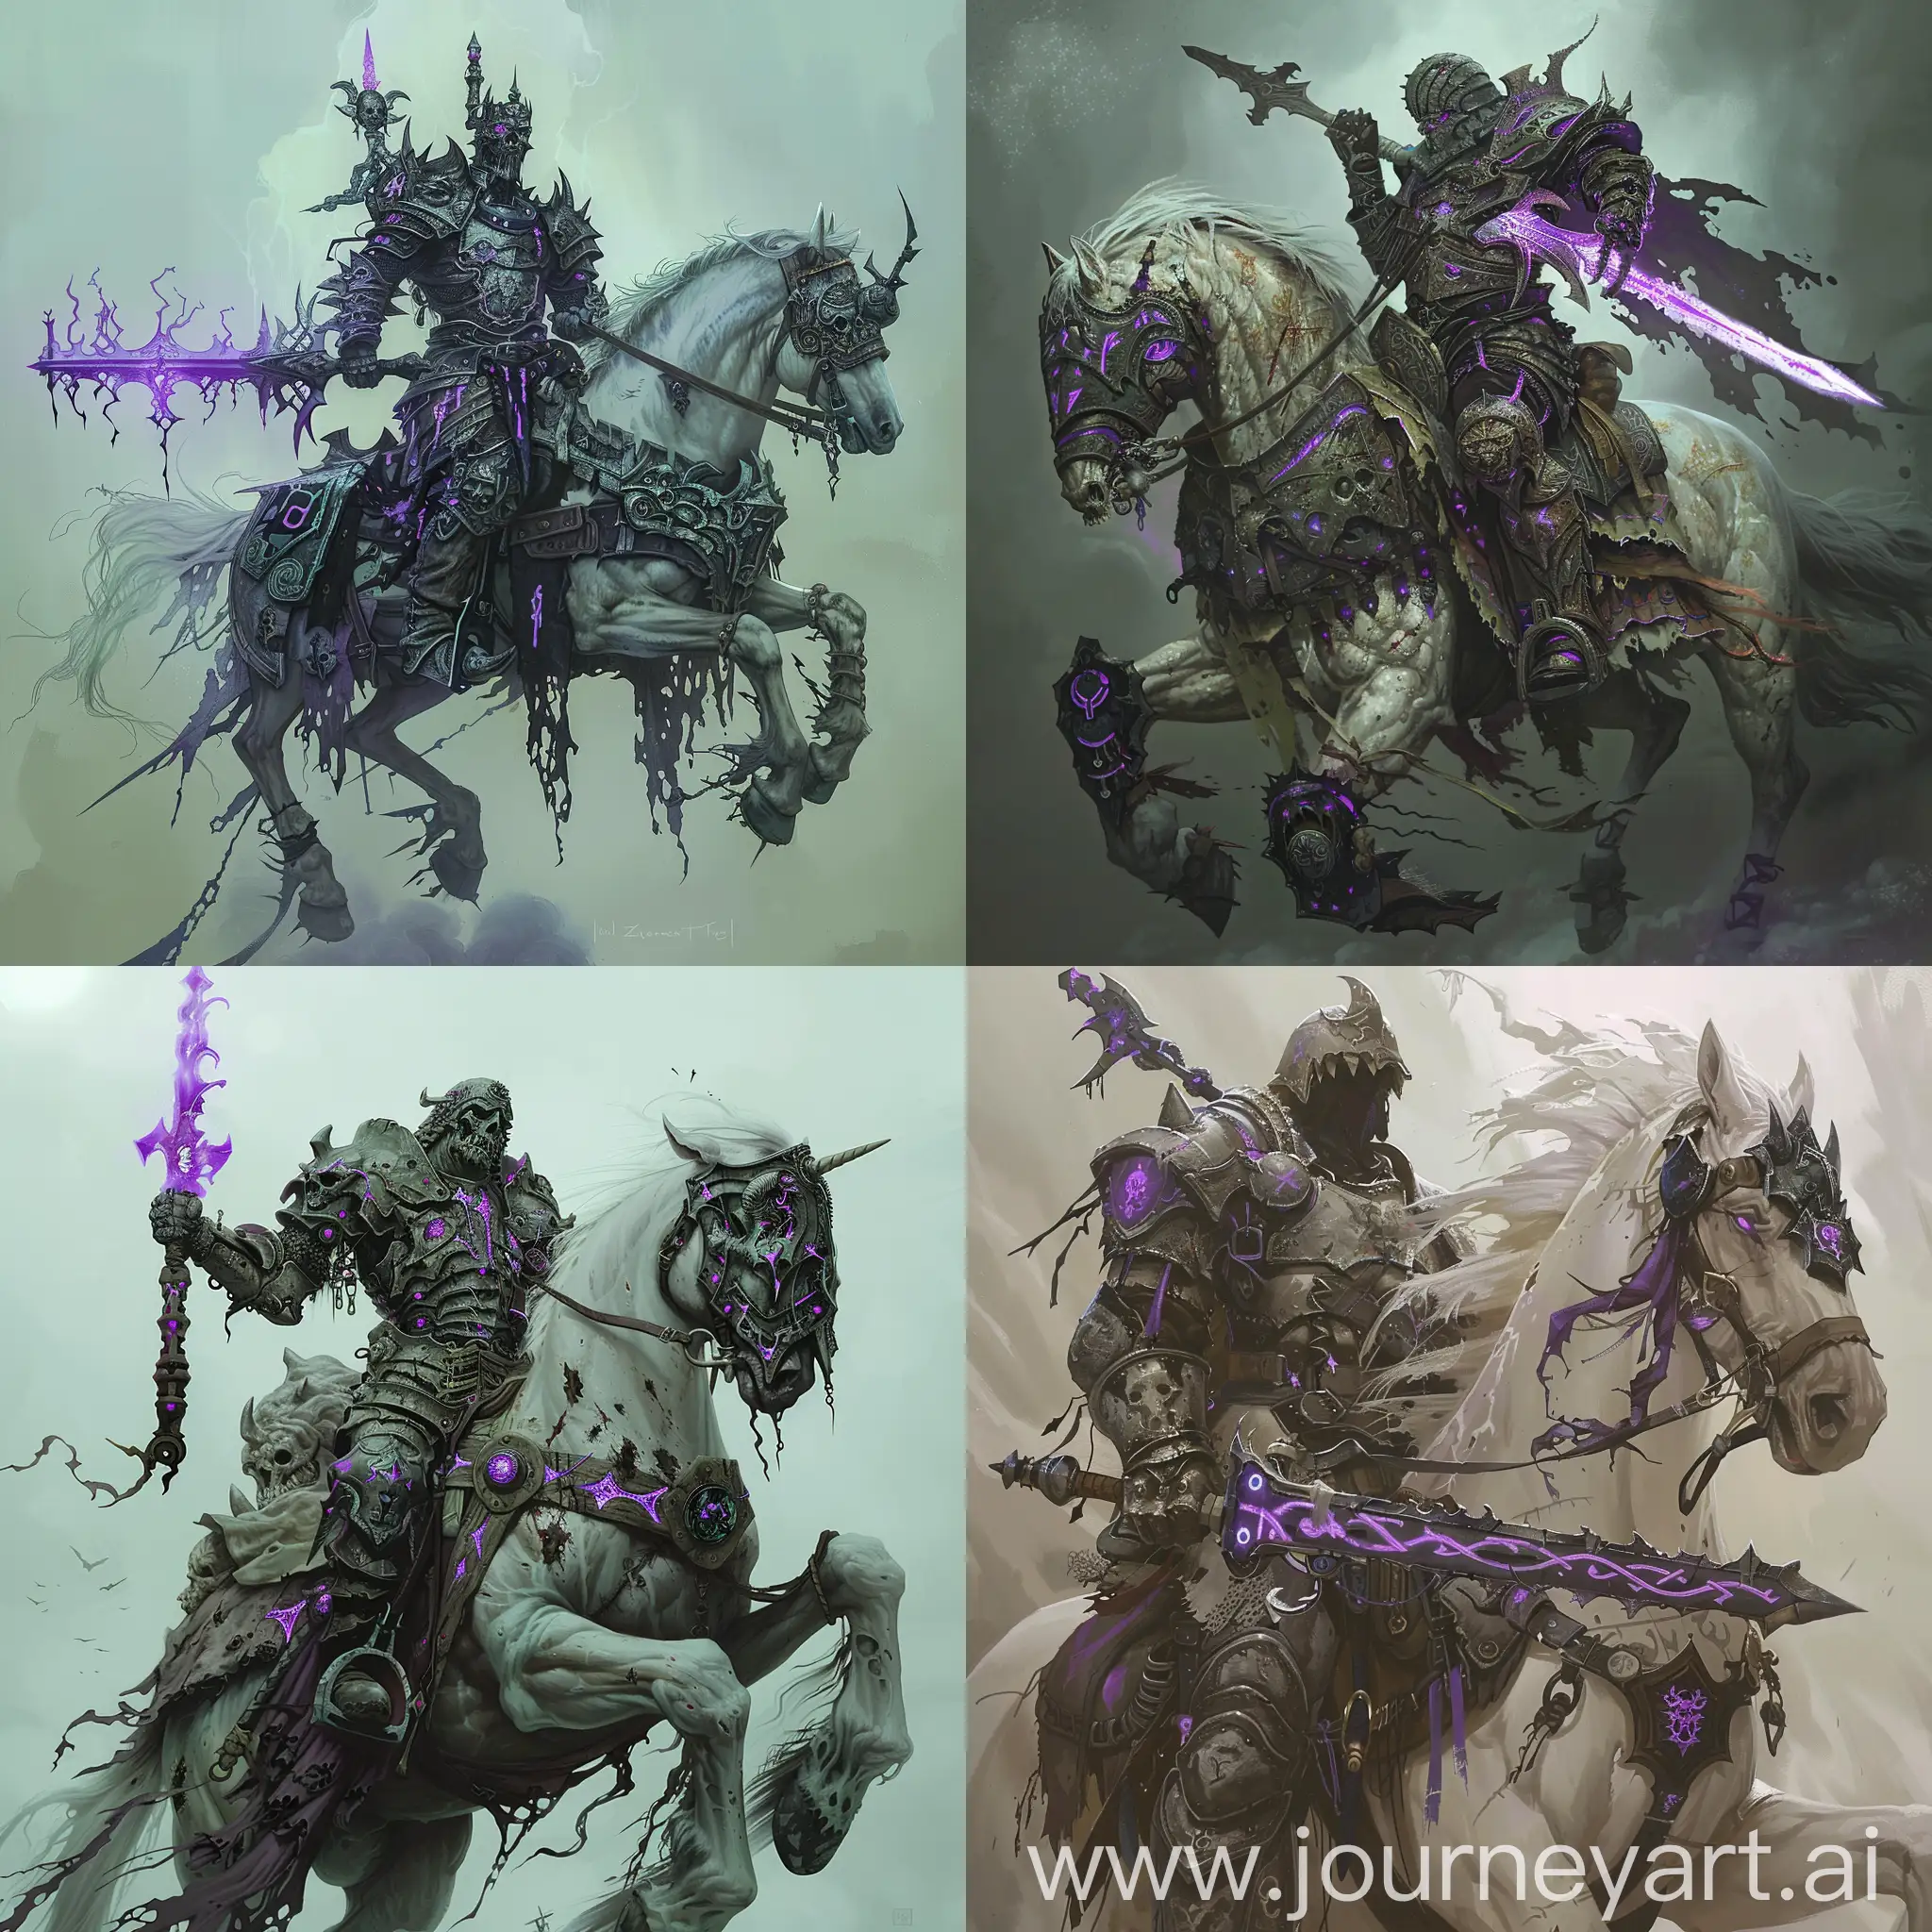 Fantasy, large humanoid with dark fantasy armoured with tattered and dark purple runes, mounted on top of a ghostly pale horse and wielding and intricate greatsword with purple glowing runes across the blade, a wrist mounted shield with a black greatwyrm crest on it